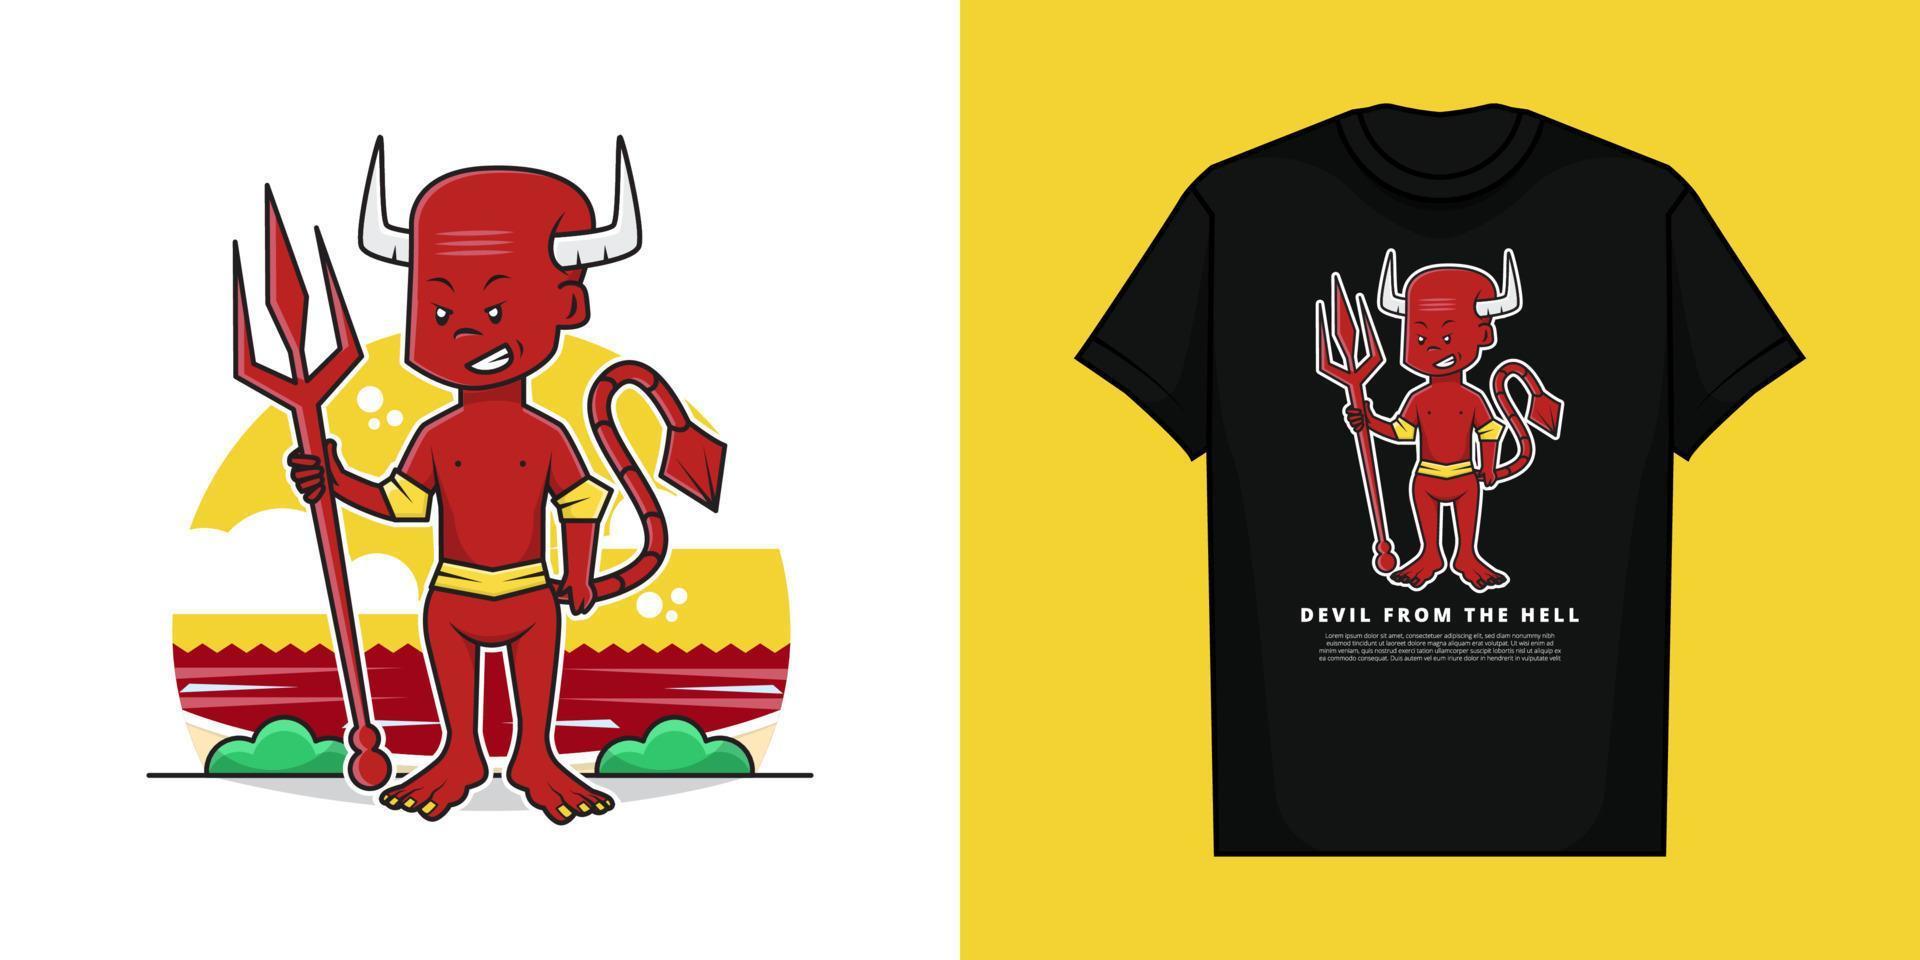 Illustration Vector Graphic of Devil from the Hell Character with T-Shirt Mockup Design